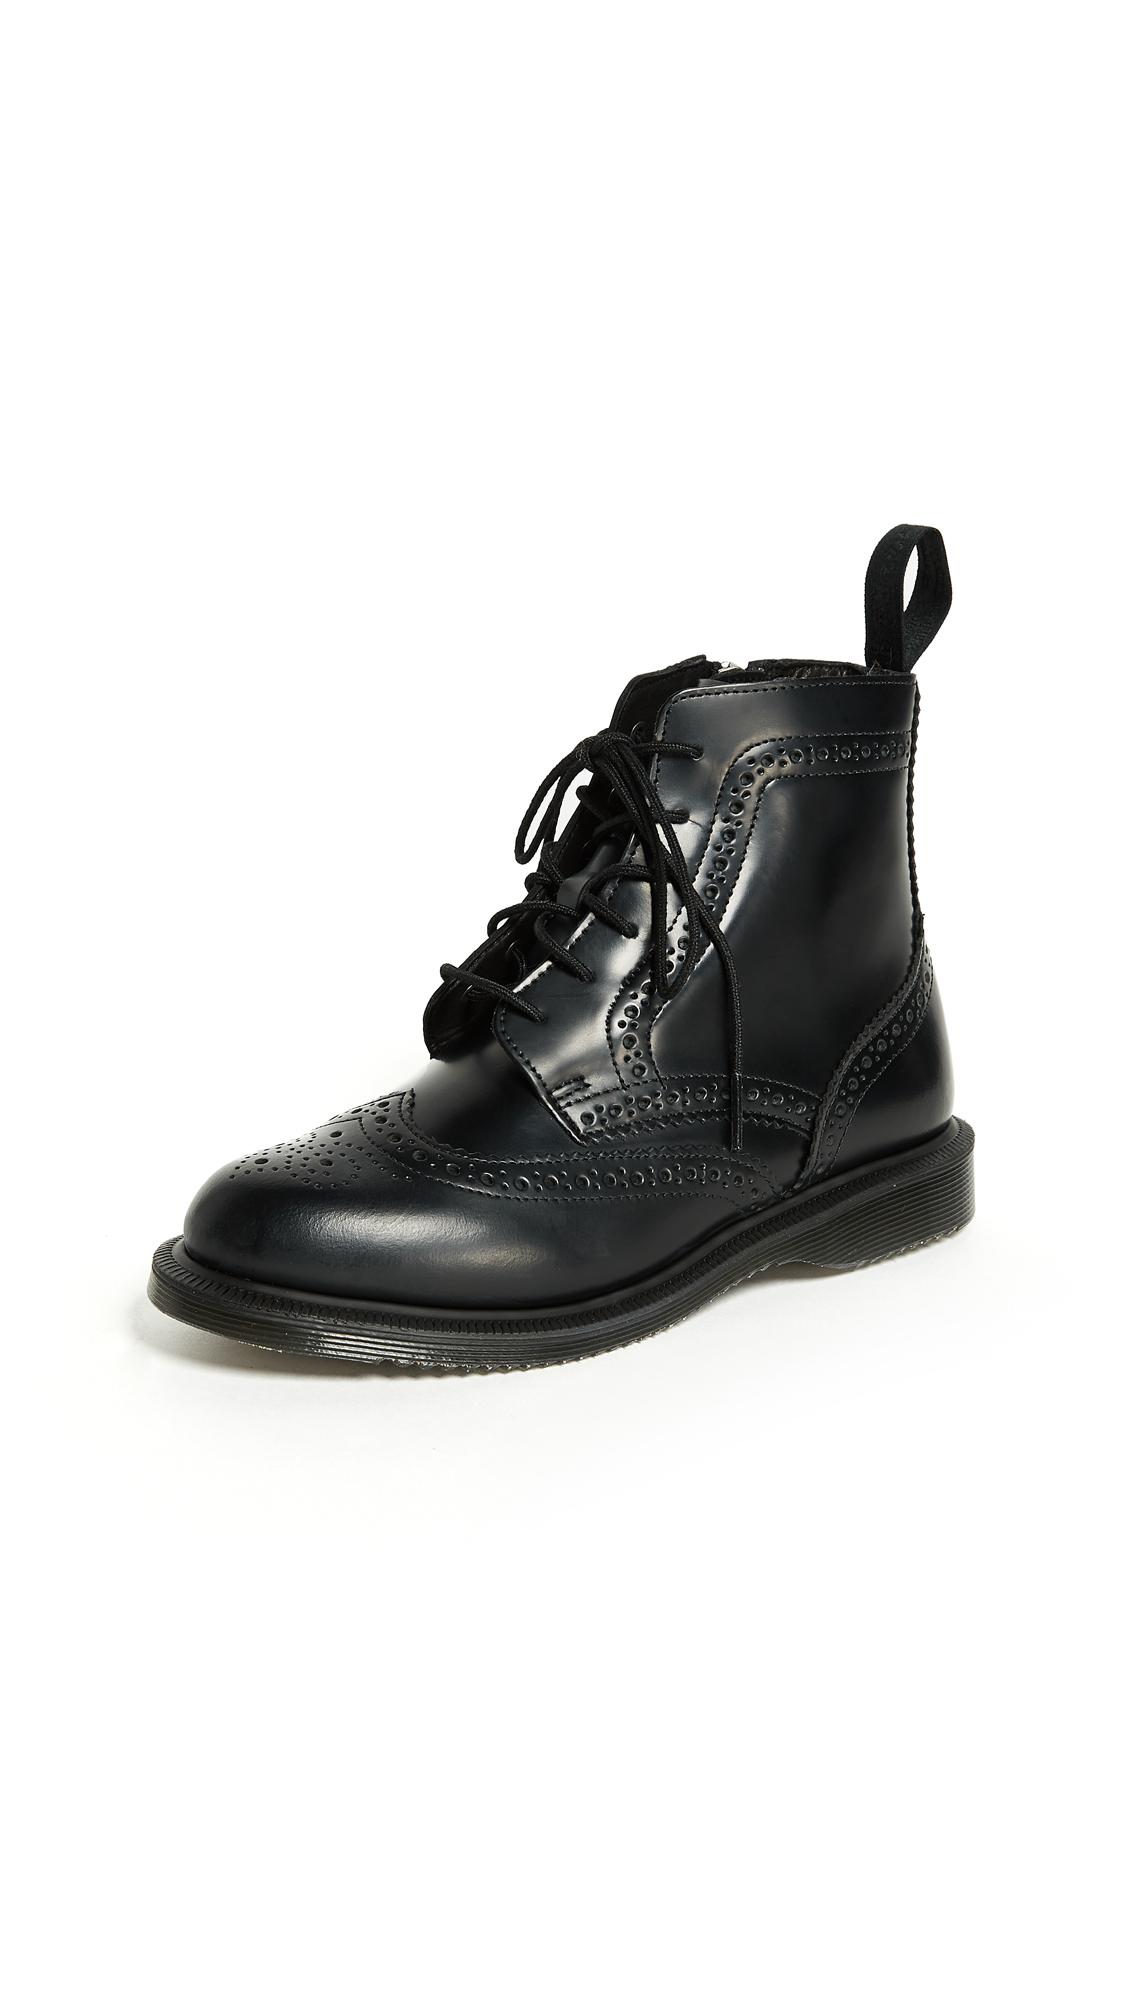 Dr. Martens Delphine 8-eye Brogue Boot in Black | Lyst